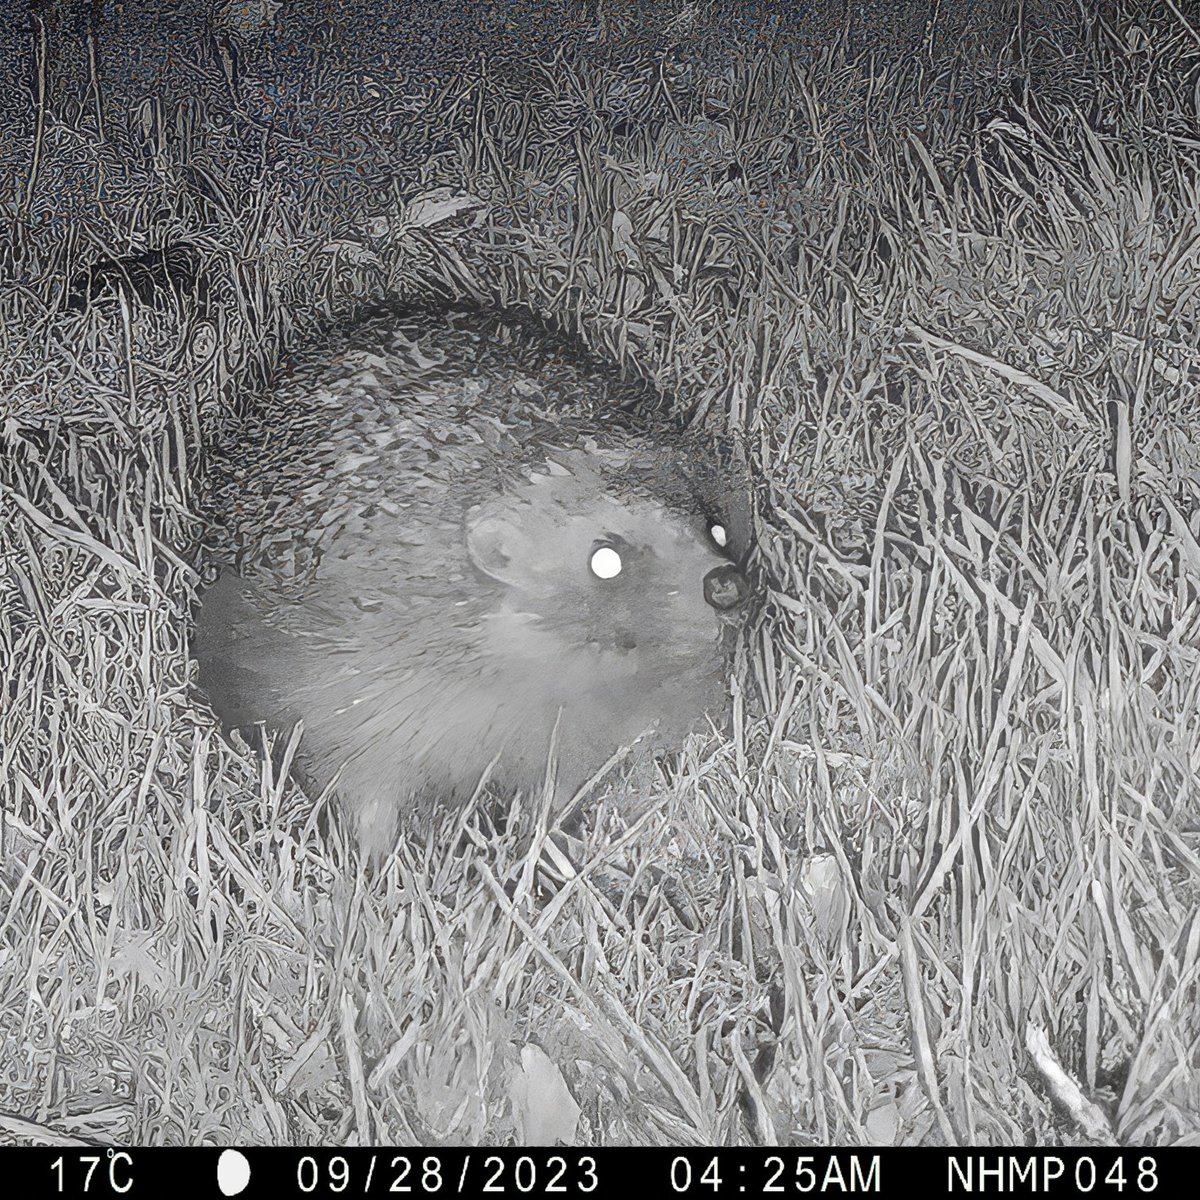 Hedgehog conservation! A pioneering 3-year pilot project – the National Hedgehog Monitoring Programme – has been launched. Using cutting-edge AI, it's a world-first in hedgehog conservation. More: bit.ly/HedgehogMonito… Photo: National Hedgehog Monitoring Programme